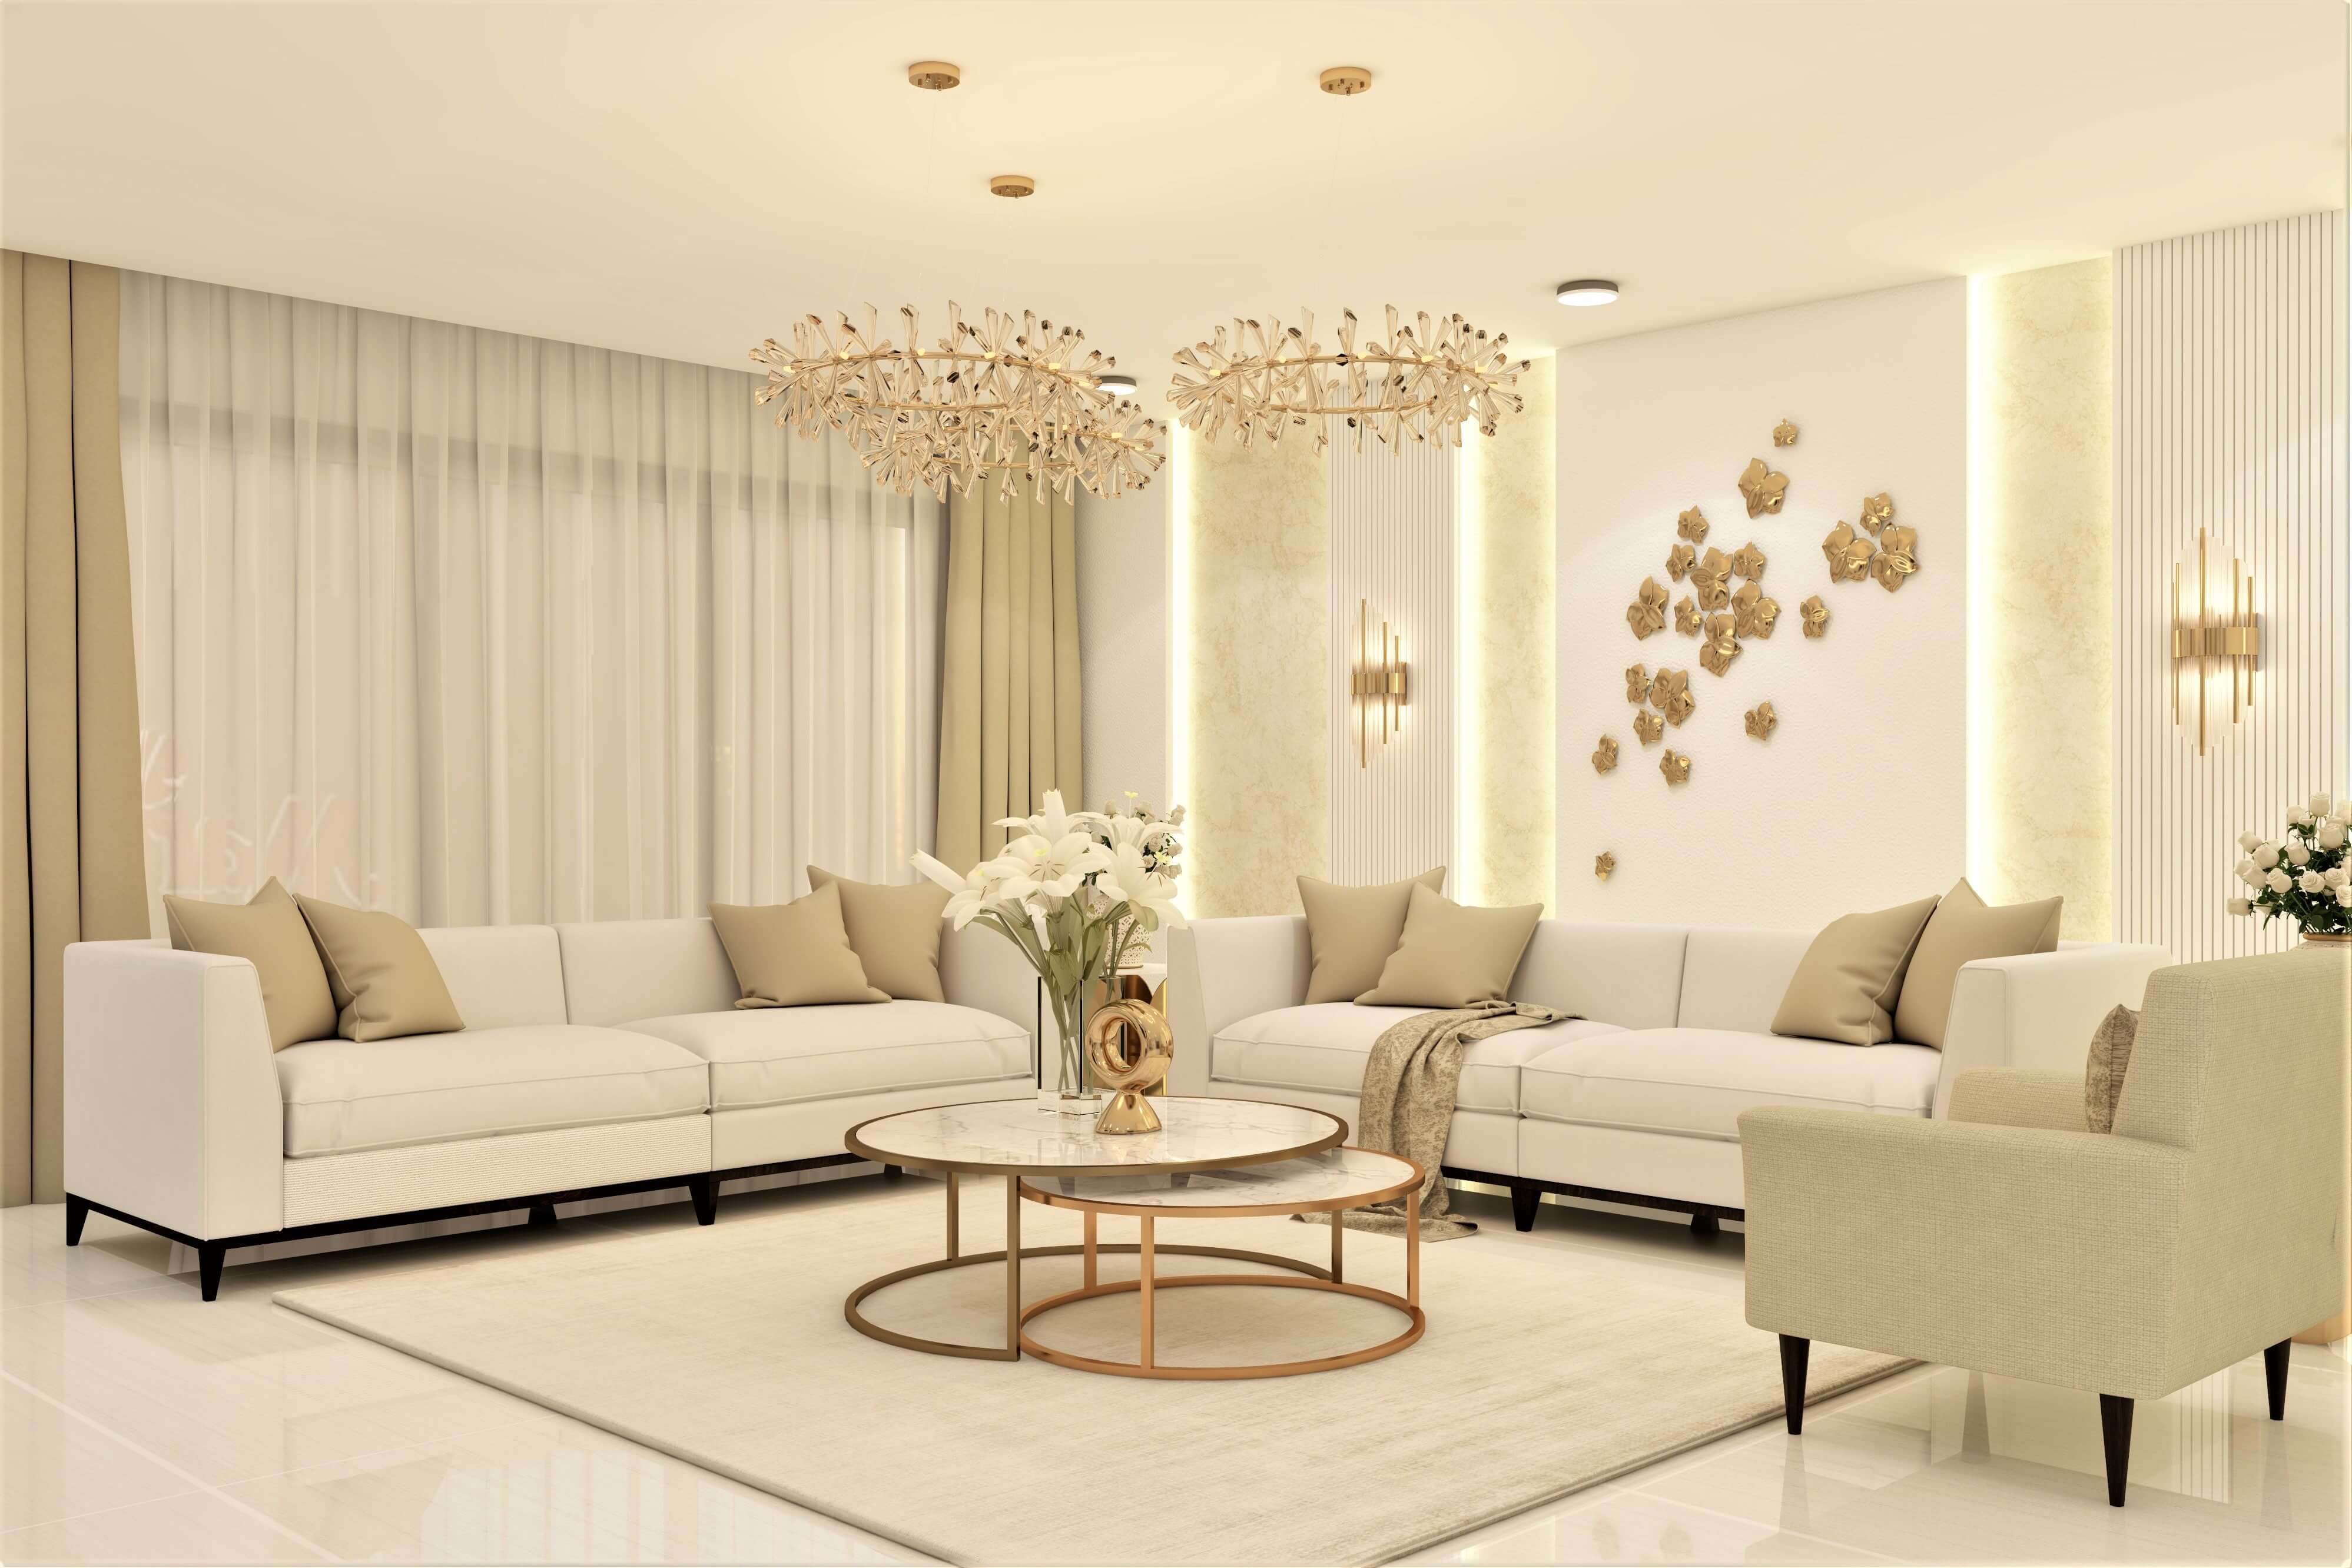 Pristine white and gold theme living room - Beautiful Homes